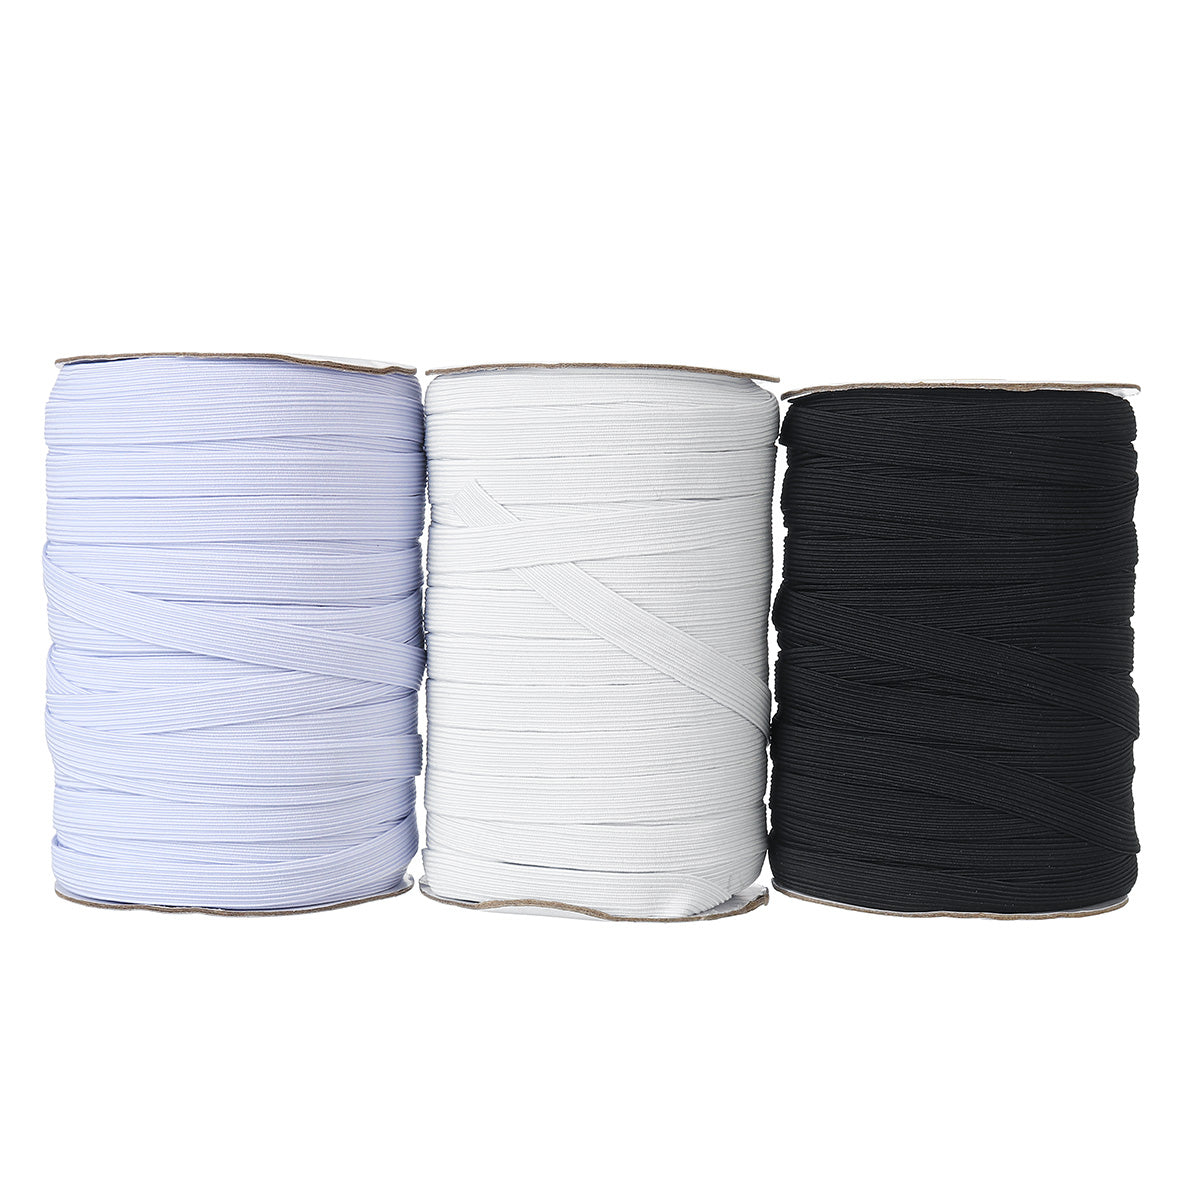 0.8/1.0/1.2cm Flat Elastic Bands White Black Bleaching-white Spandex Elastic Ribbon DIY Crafts Trousers Sewing Accessories